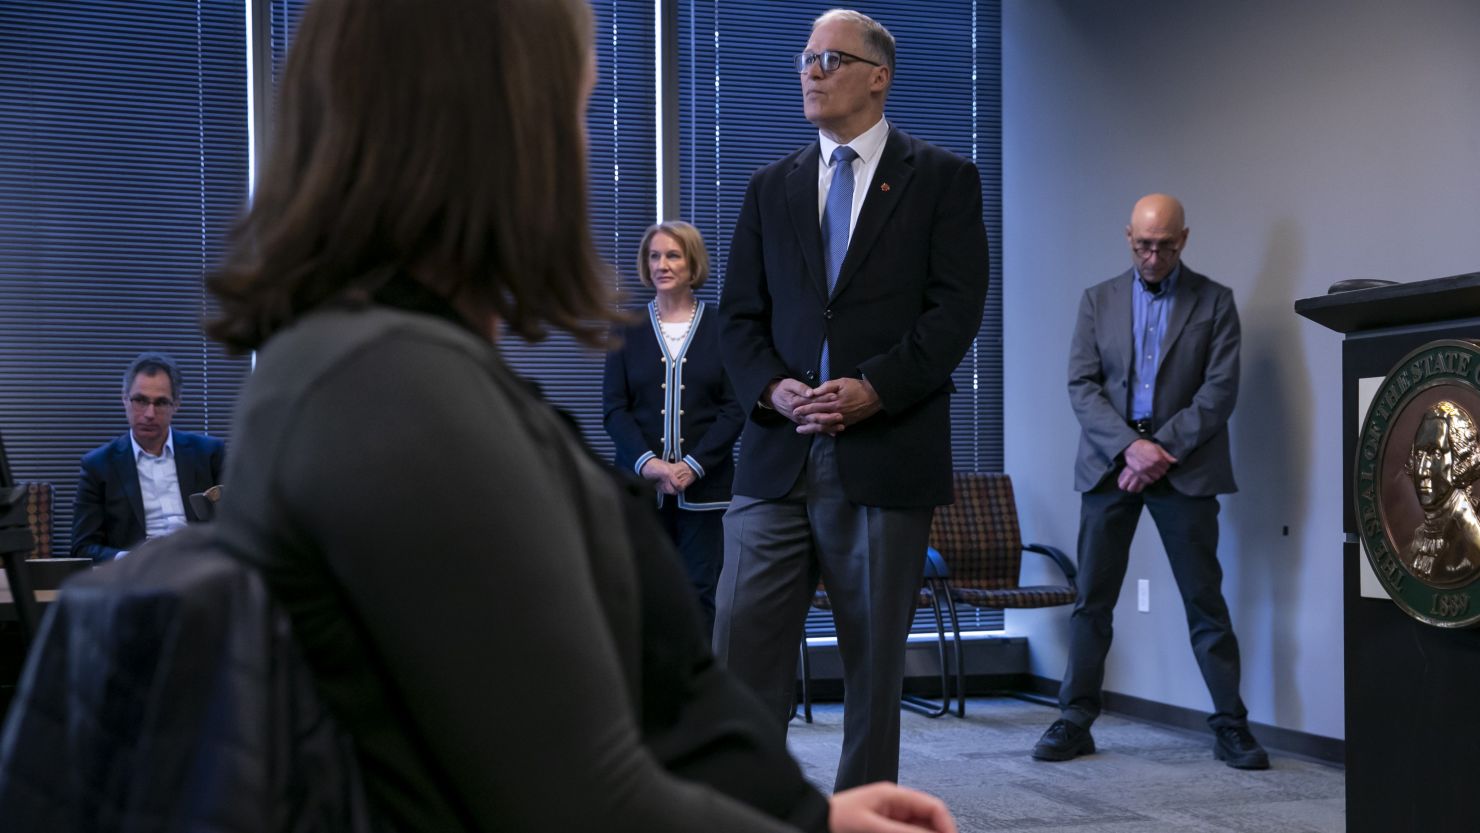 Washington Gov. Jay Inslee listens to question from reporters at a press conference about the coronavirus outbreak March 16, 2020 in Seattle.